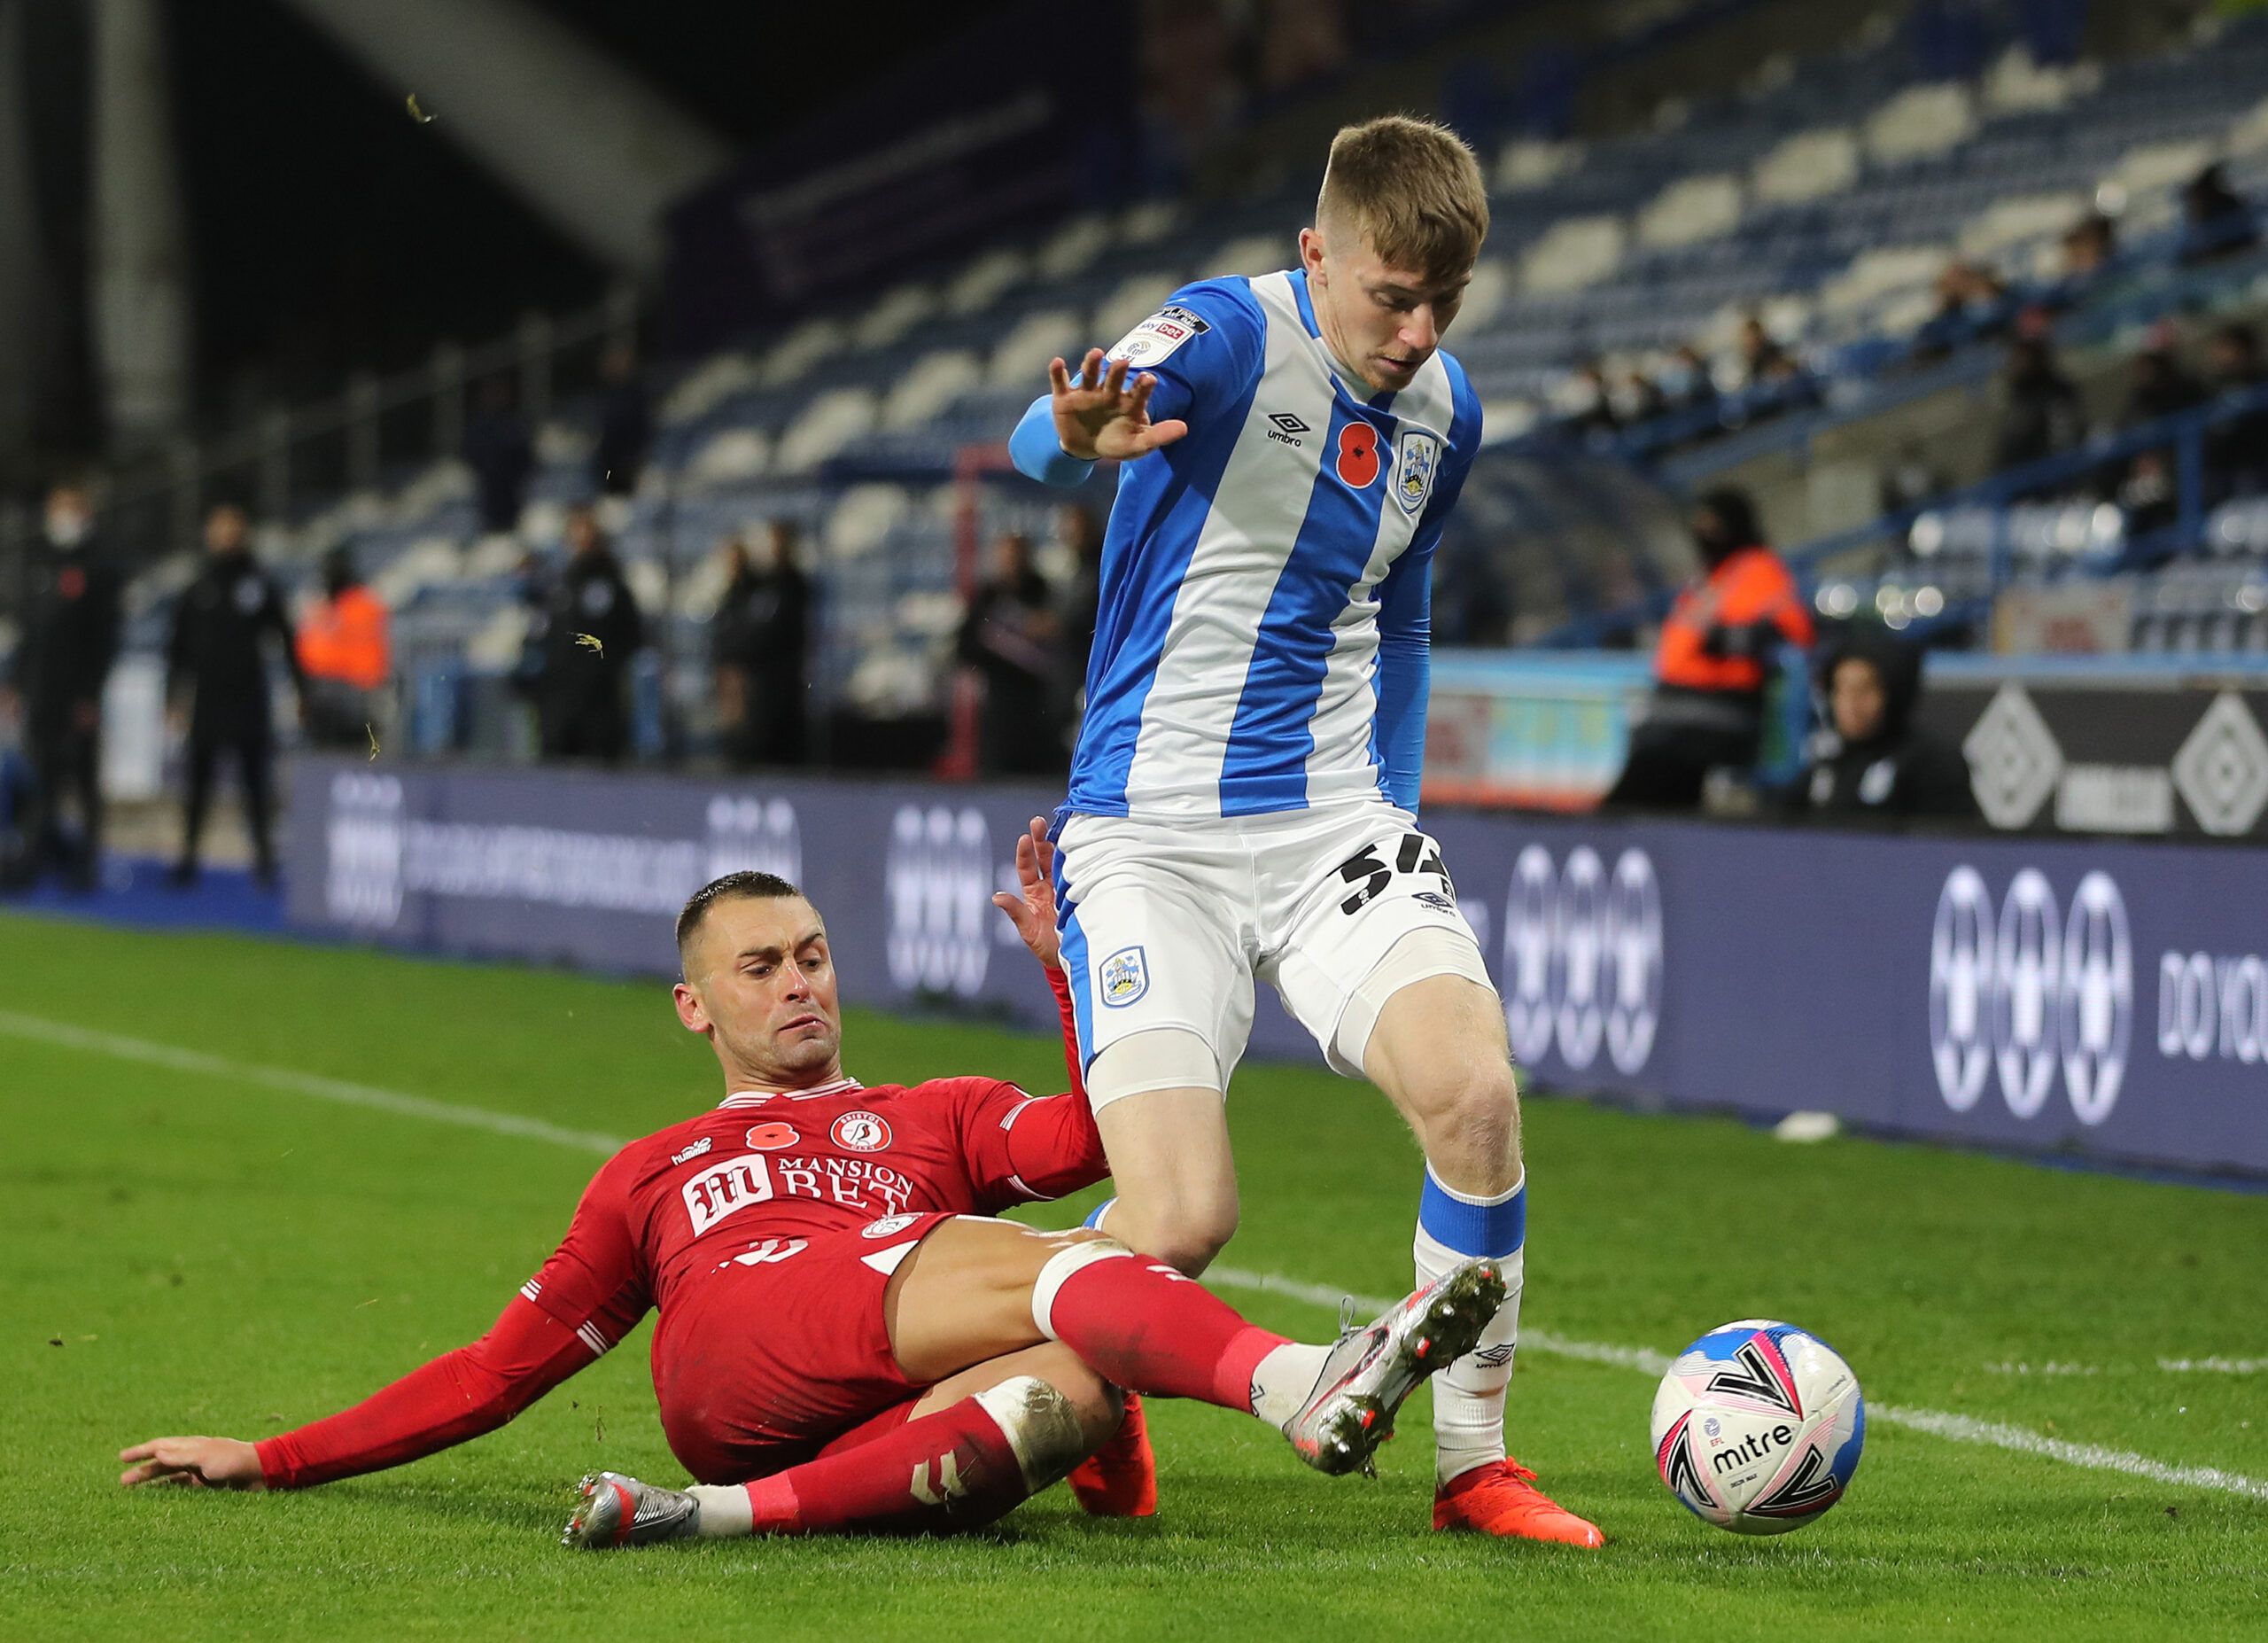 Soccer Football - Championship - Huddersfield Town v Bristol City - John Smith's Stadium, Huddersfield, Britain - November 3, 2020 Bristol City's Jack Hunt in action with Huddersfield Town's Matty Daly Action Images/Molly Darlington EDITORIAL USE ONLY. No use with unauthorized audio, video, data, fixture lists, club/league logos or 'live' services. Online in-match use limited to 75 images, no video emulation. No use in betting, games or single club /league/player publications.  Please contact yo